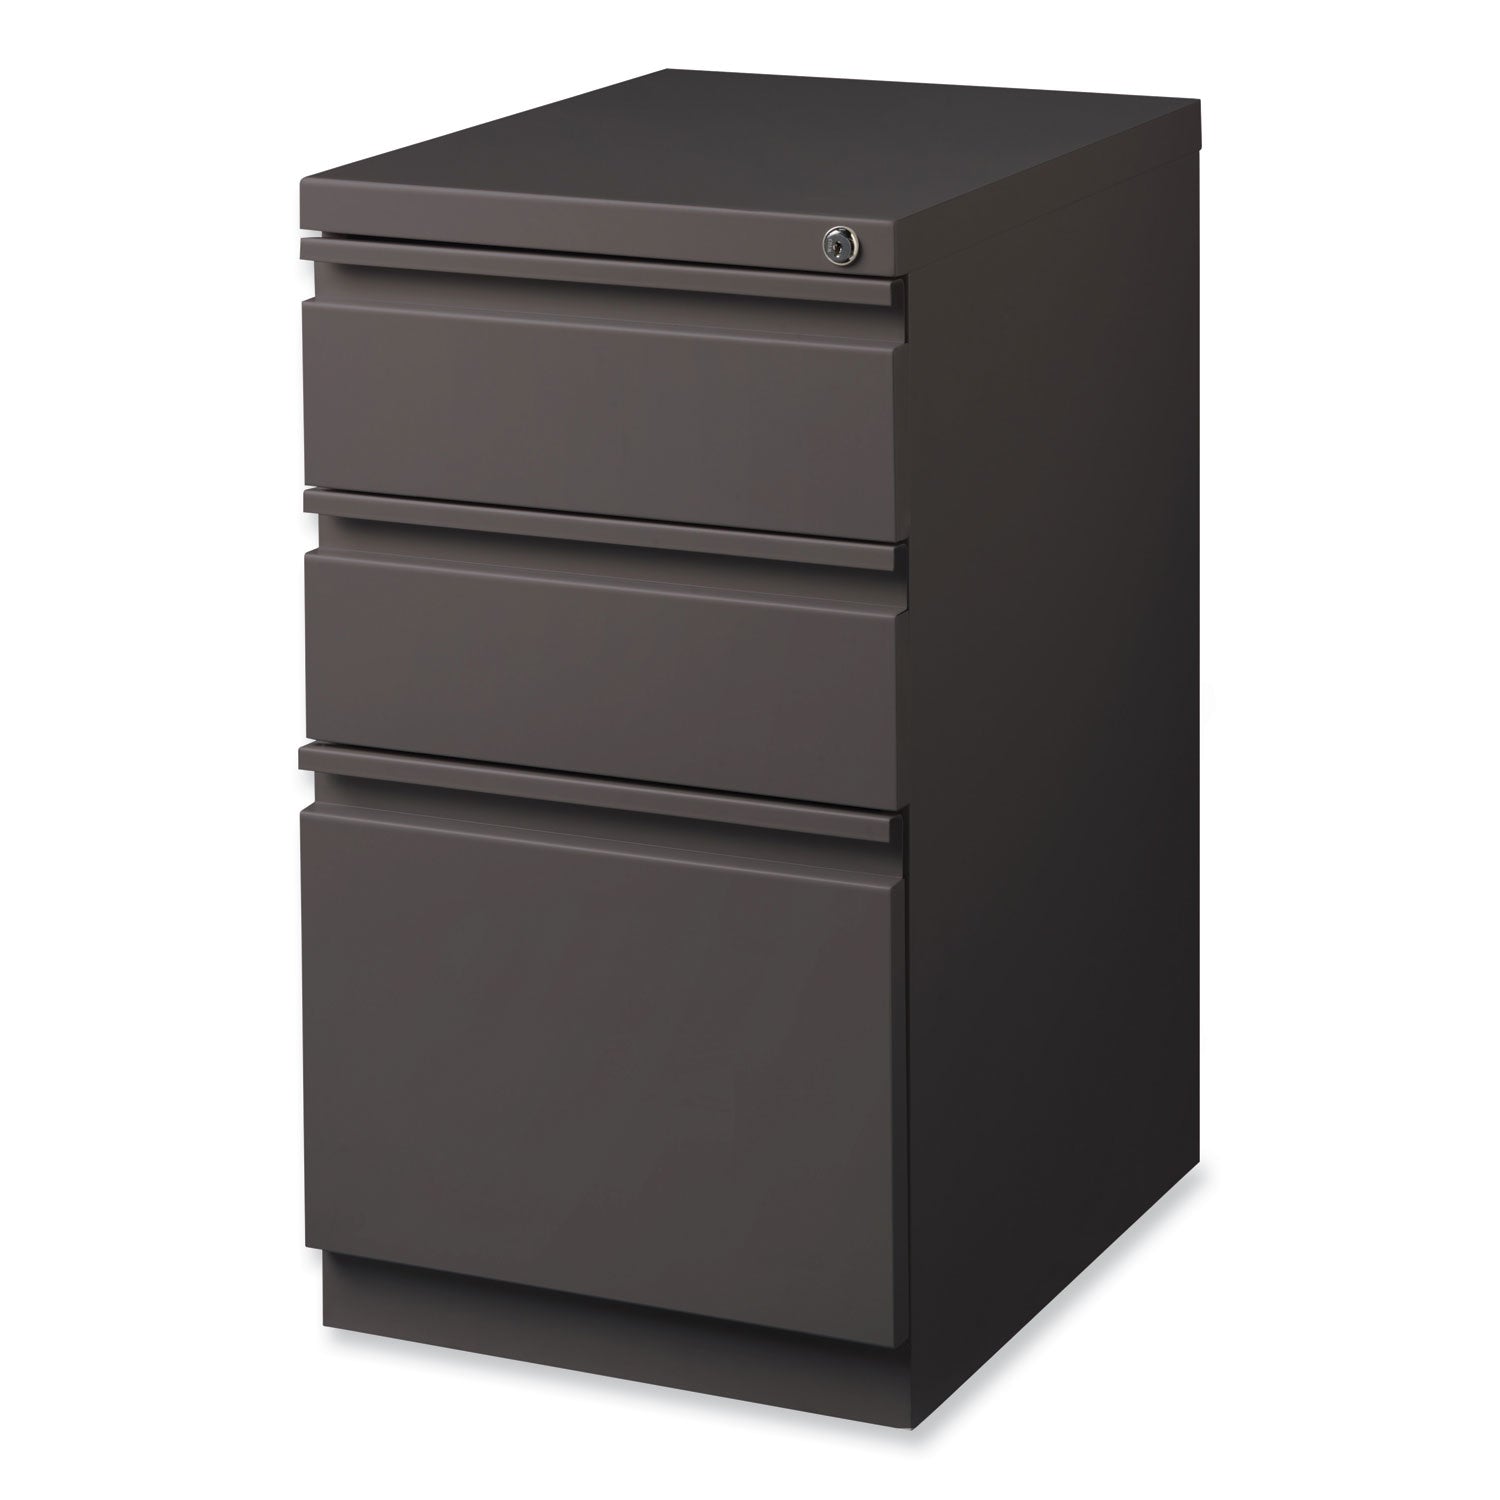 full-width-pull-20-deep-mobile-pedestal-file-box-box-file-letter-medium-tone-15x1988x2775-ships-in-4-6-business-days_hid19354 - 3